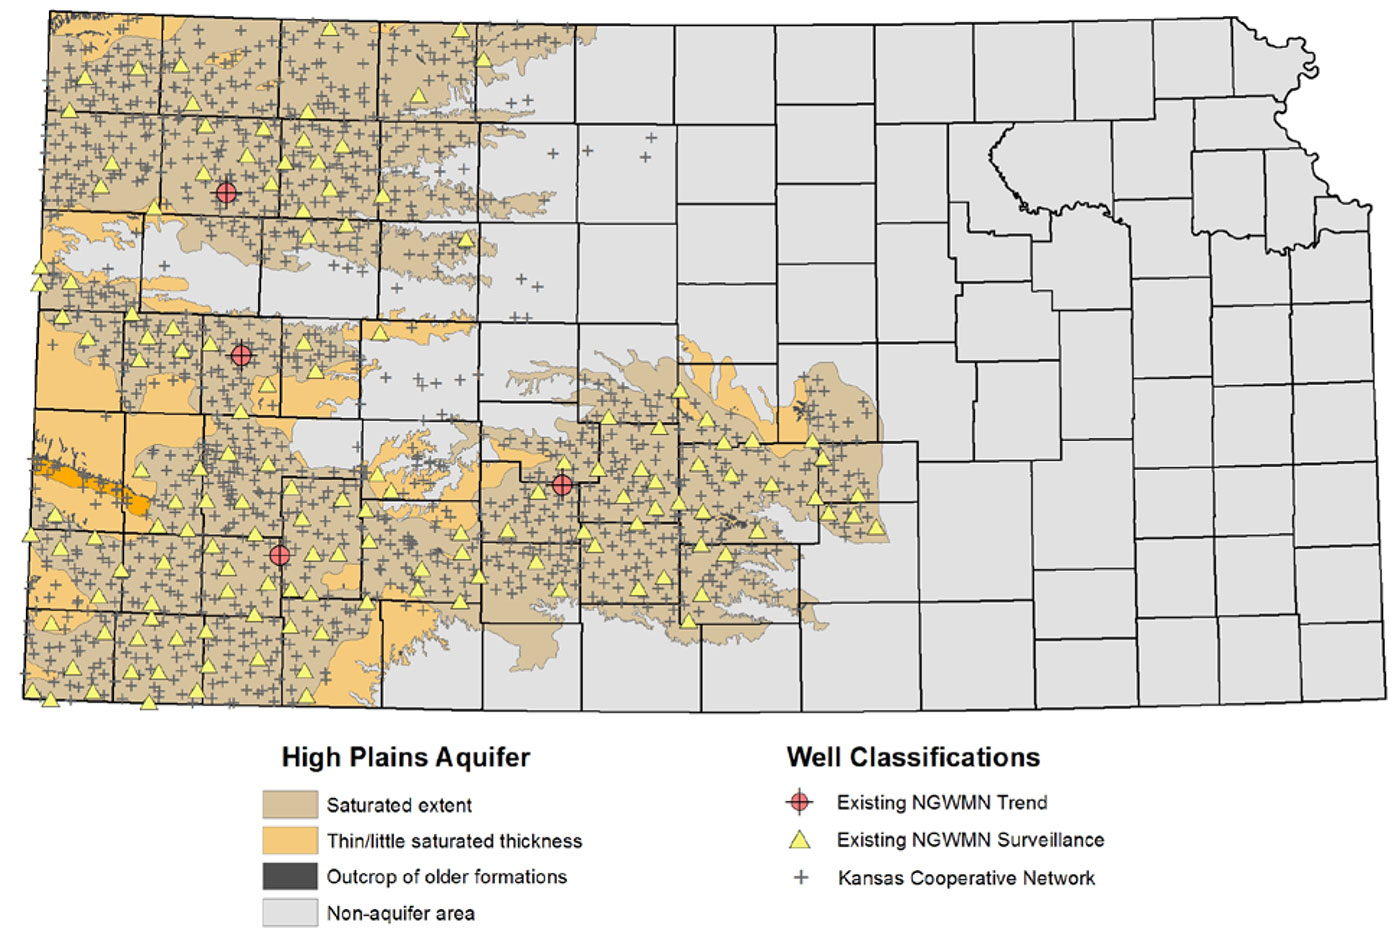 Kansas cooperative network and participating 2016 High Plains Aquifer NGWMN sites.